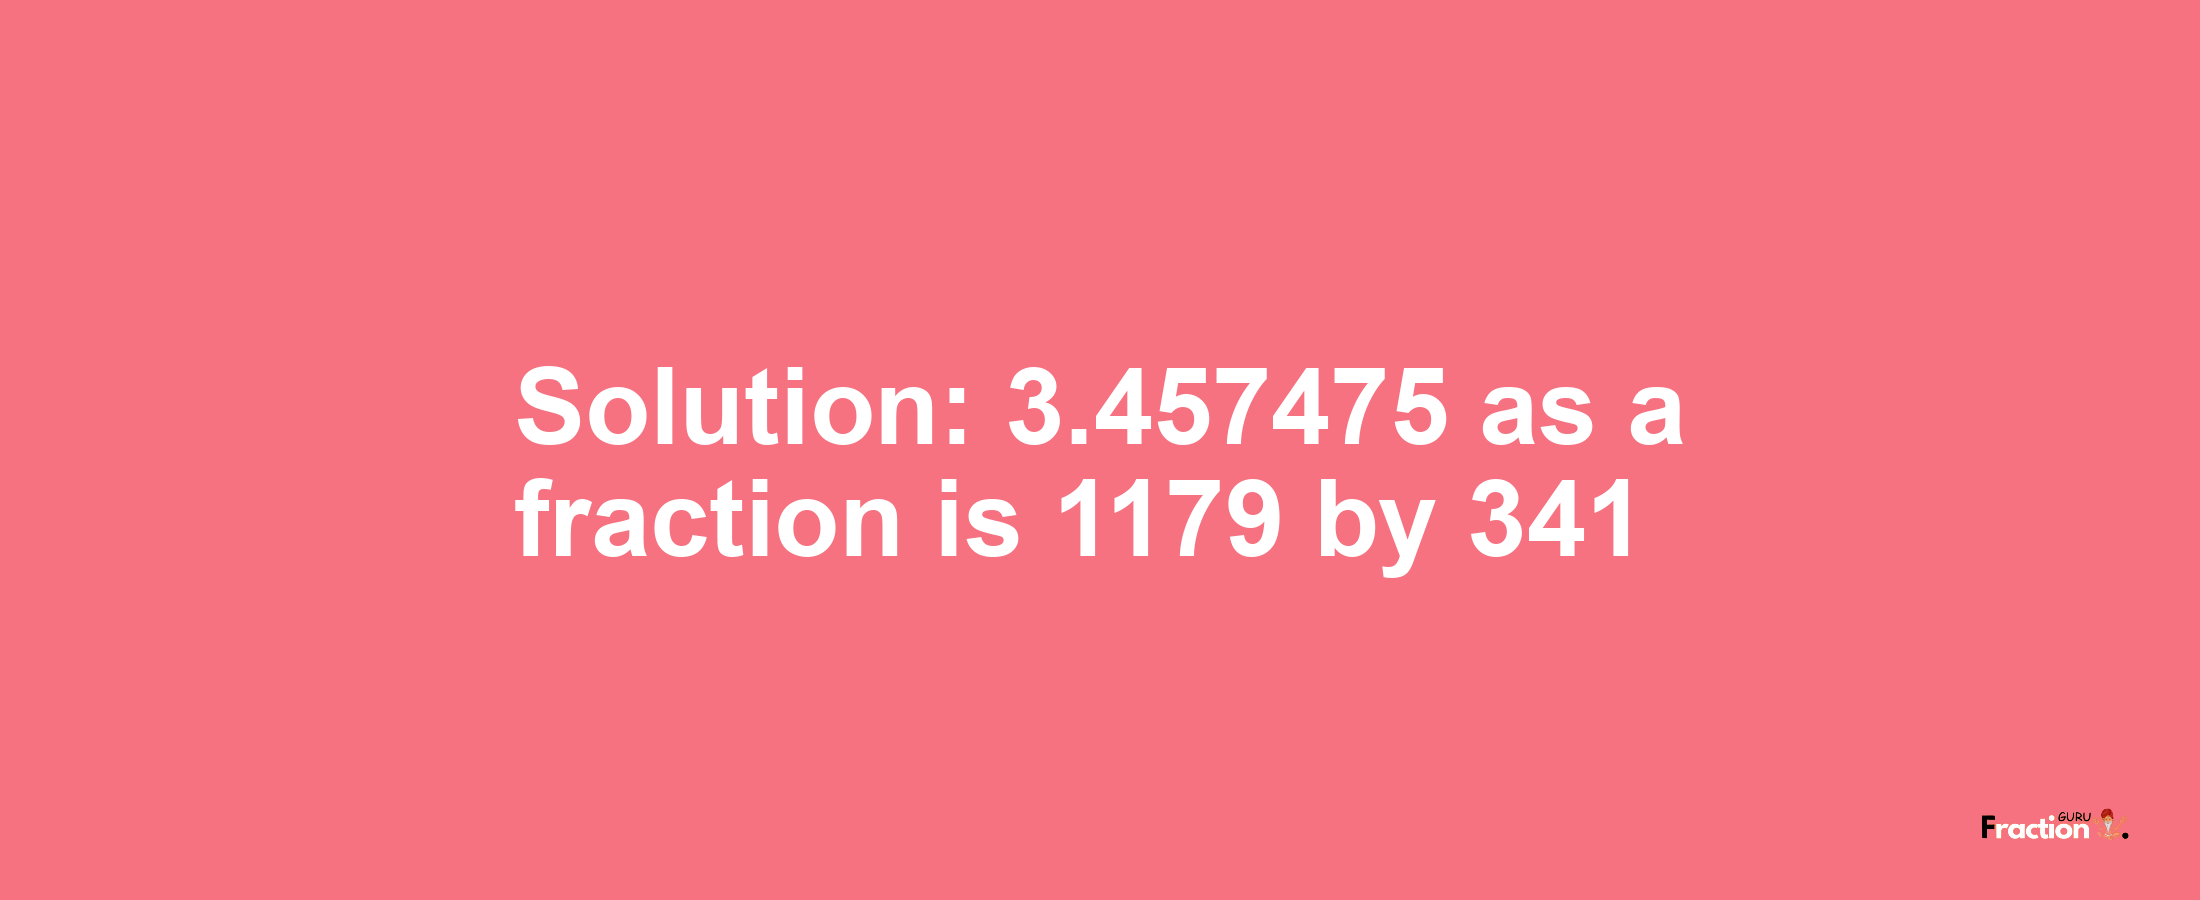 Solution:3.457475 as a fraction is 1179/341